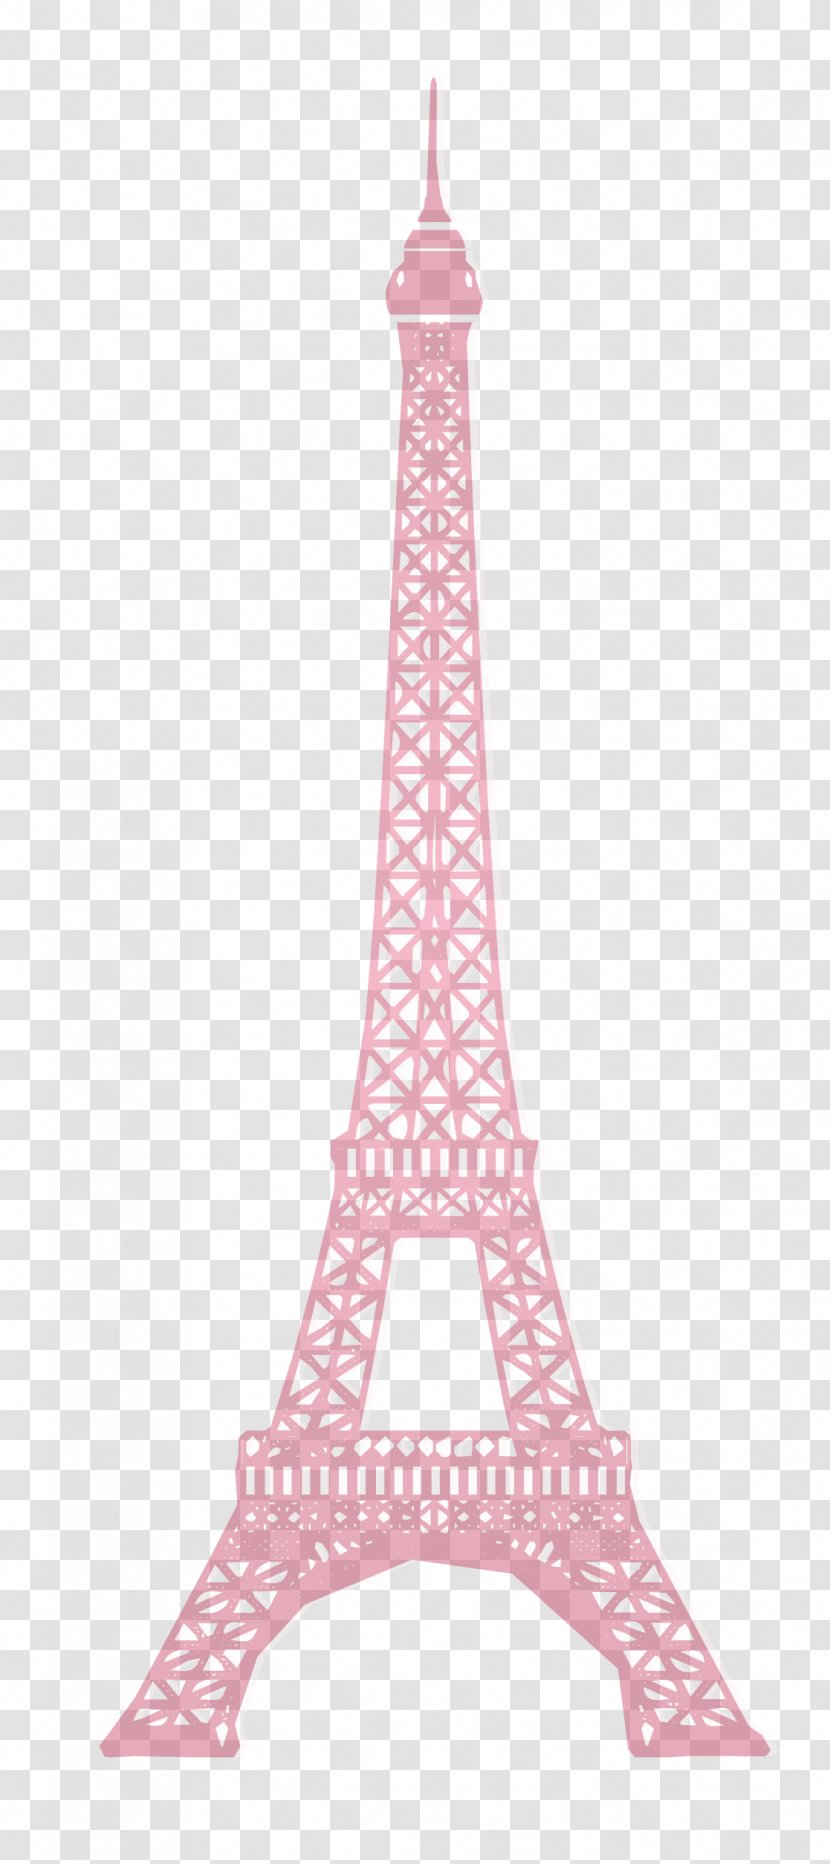 Eiffel Tower Silhouette - Product Design Transparent PNG